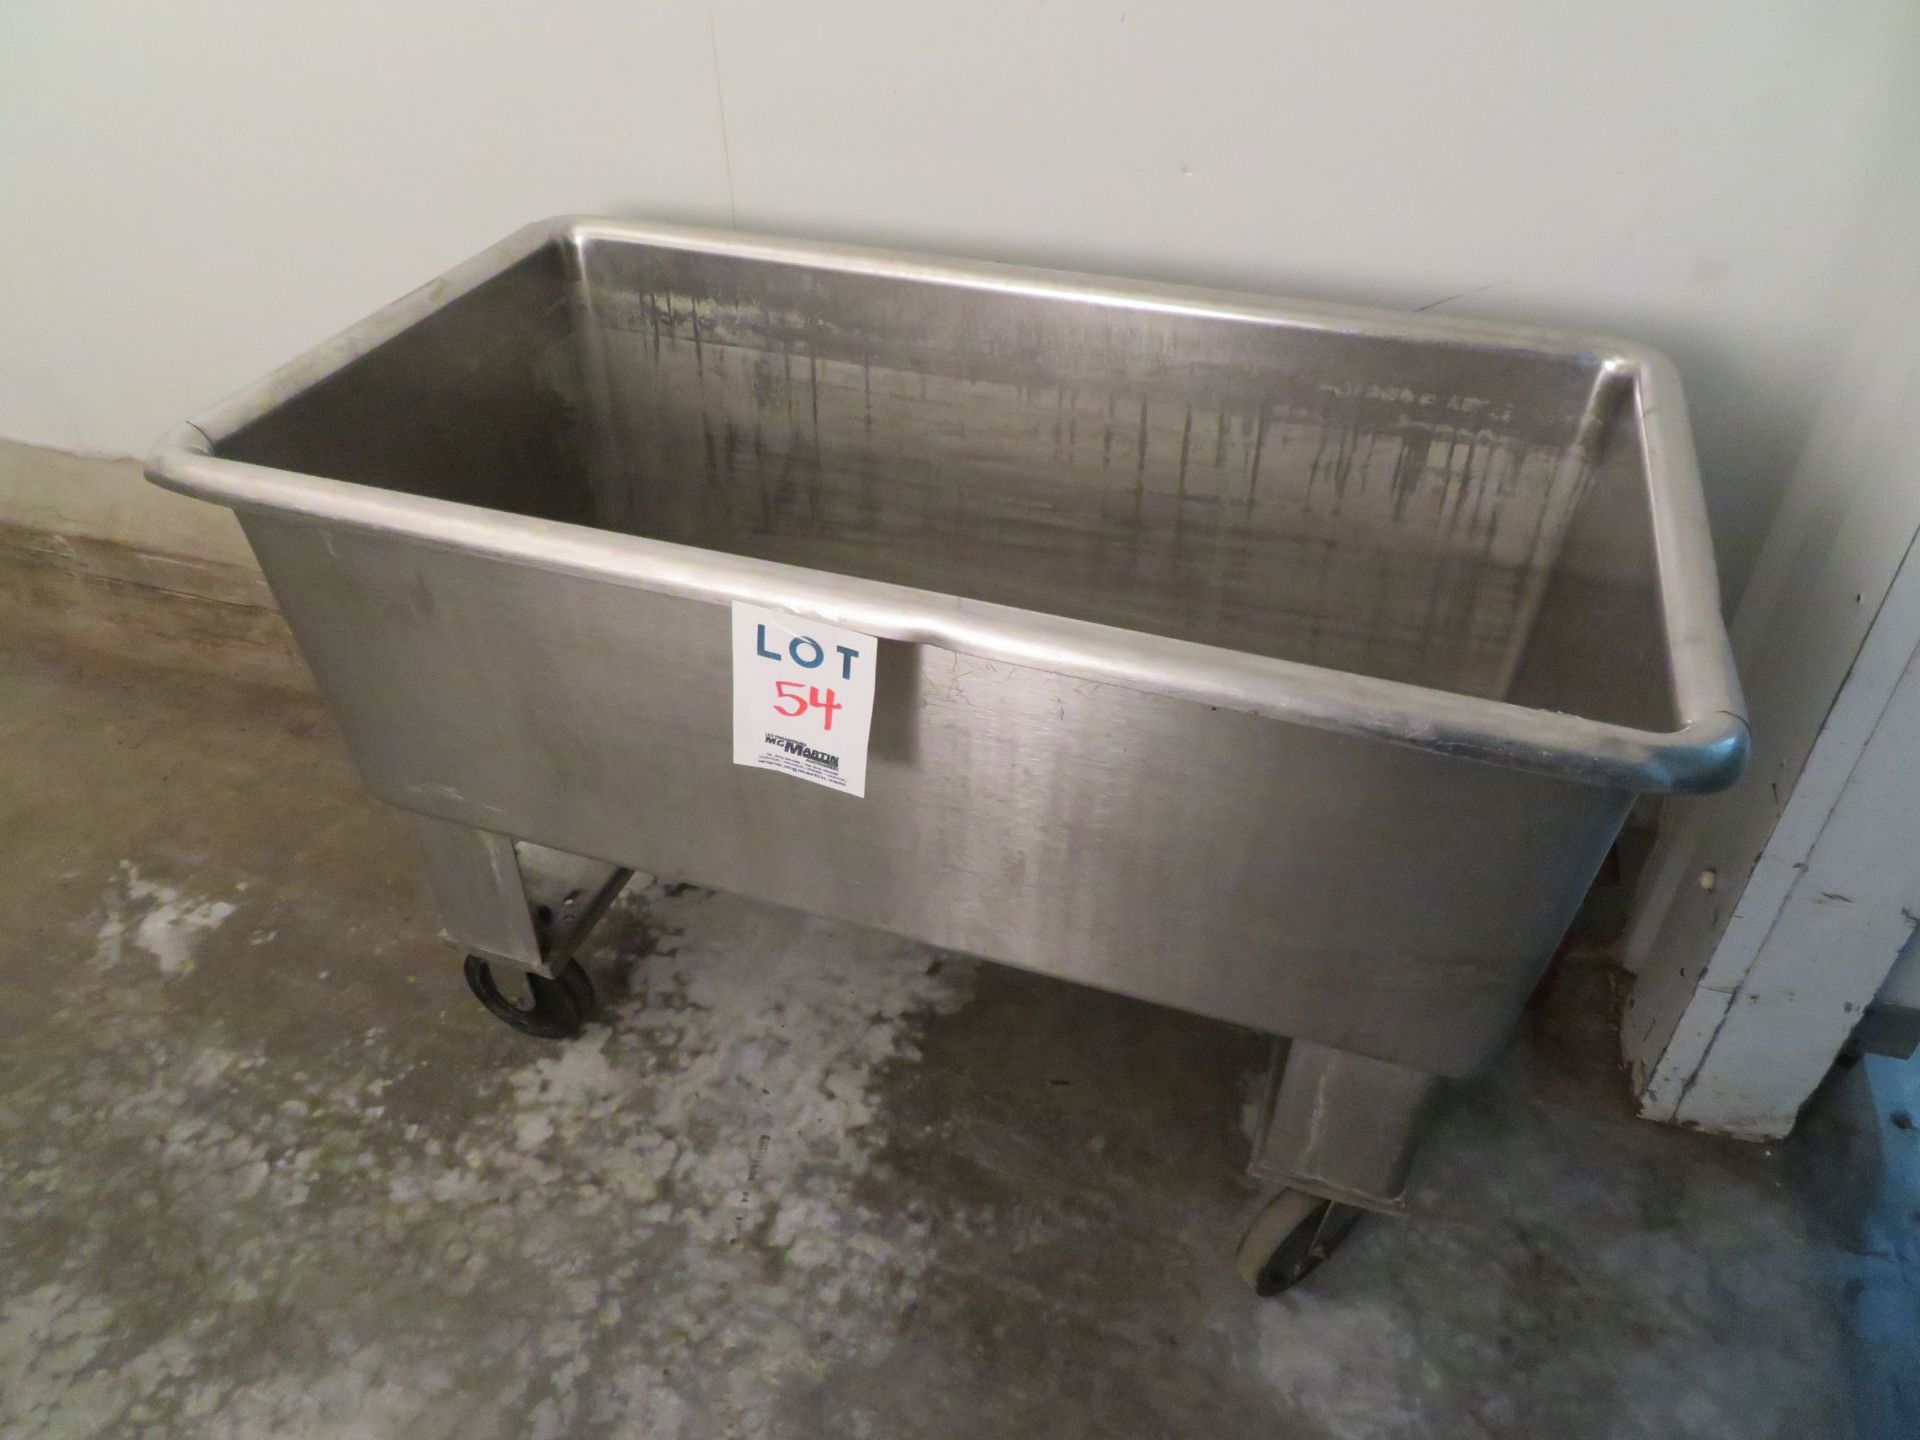 Stainless steel tub approx. 48"w x 25"d x 31"h